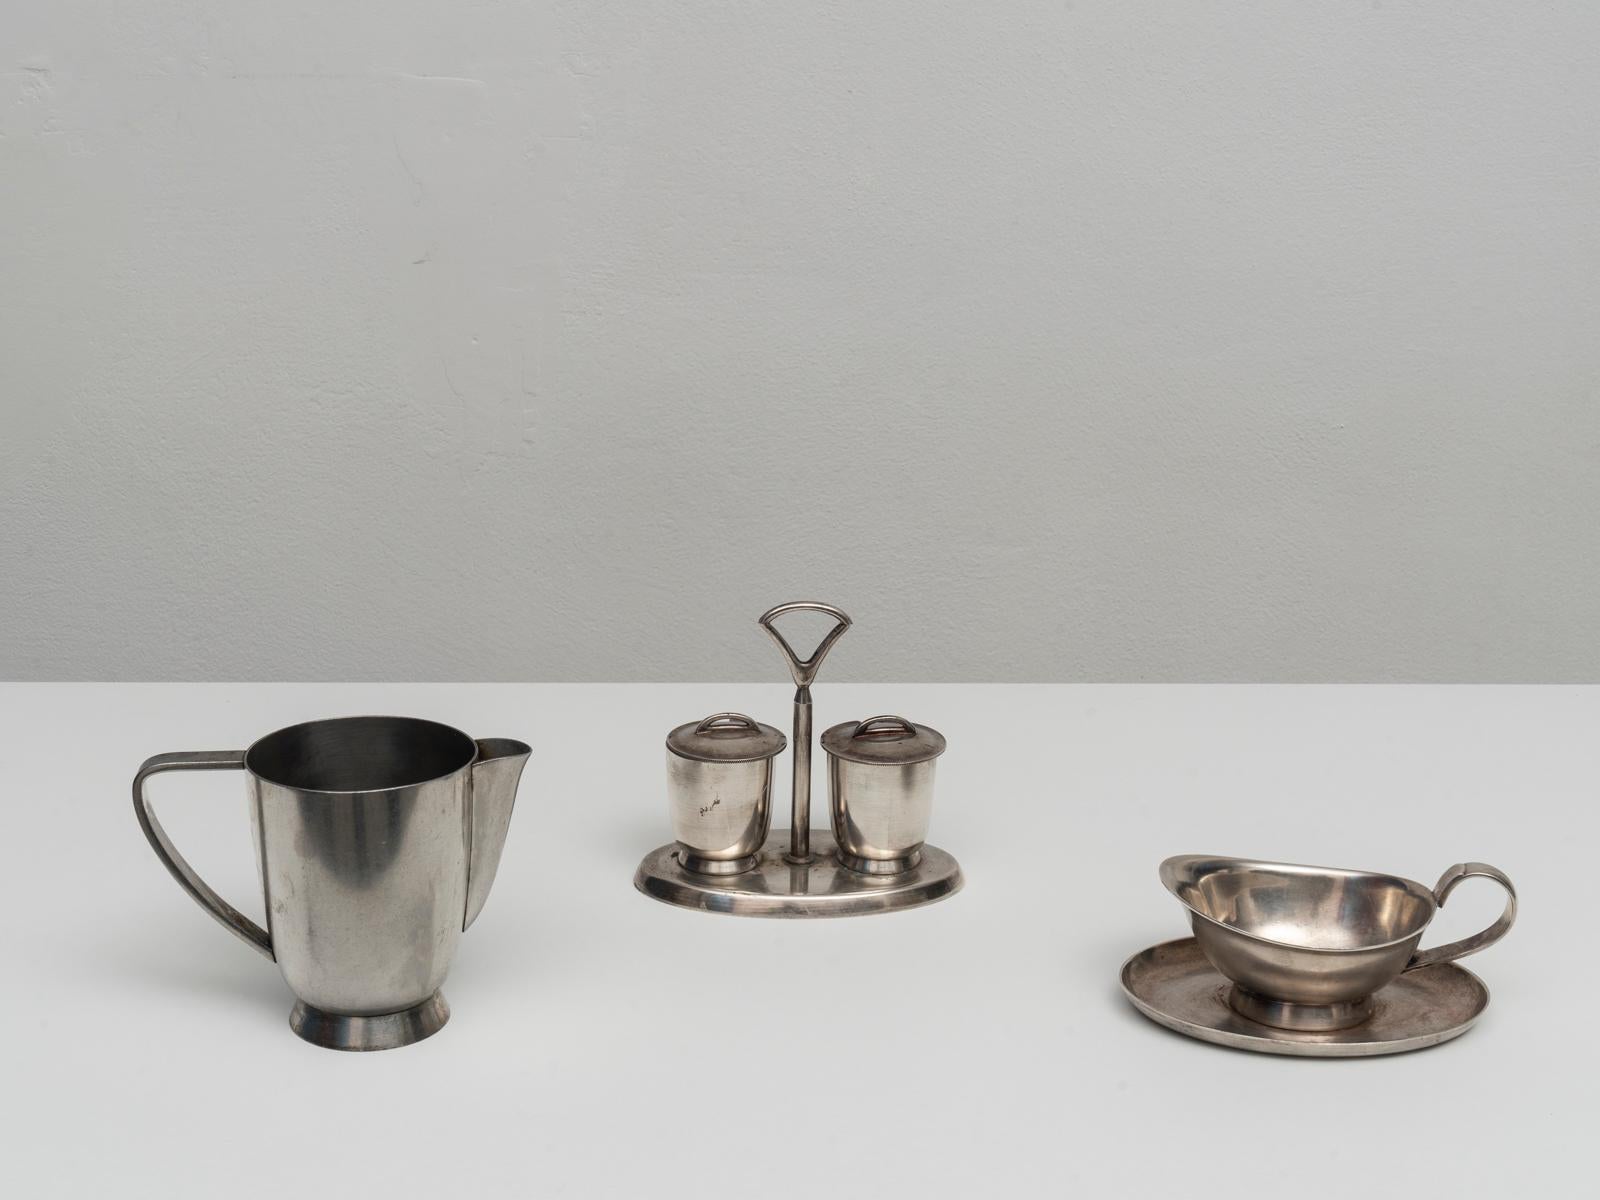 This serving set was designed by Gio Ponti for Fratelli Calderoni in the 1950s. It is made of silver plated alpaca, an alloy of copper zinc and nickel. 
The set includes a milk jug, a sauce bowl and a salt and pepper container. 
This series was used